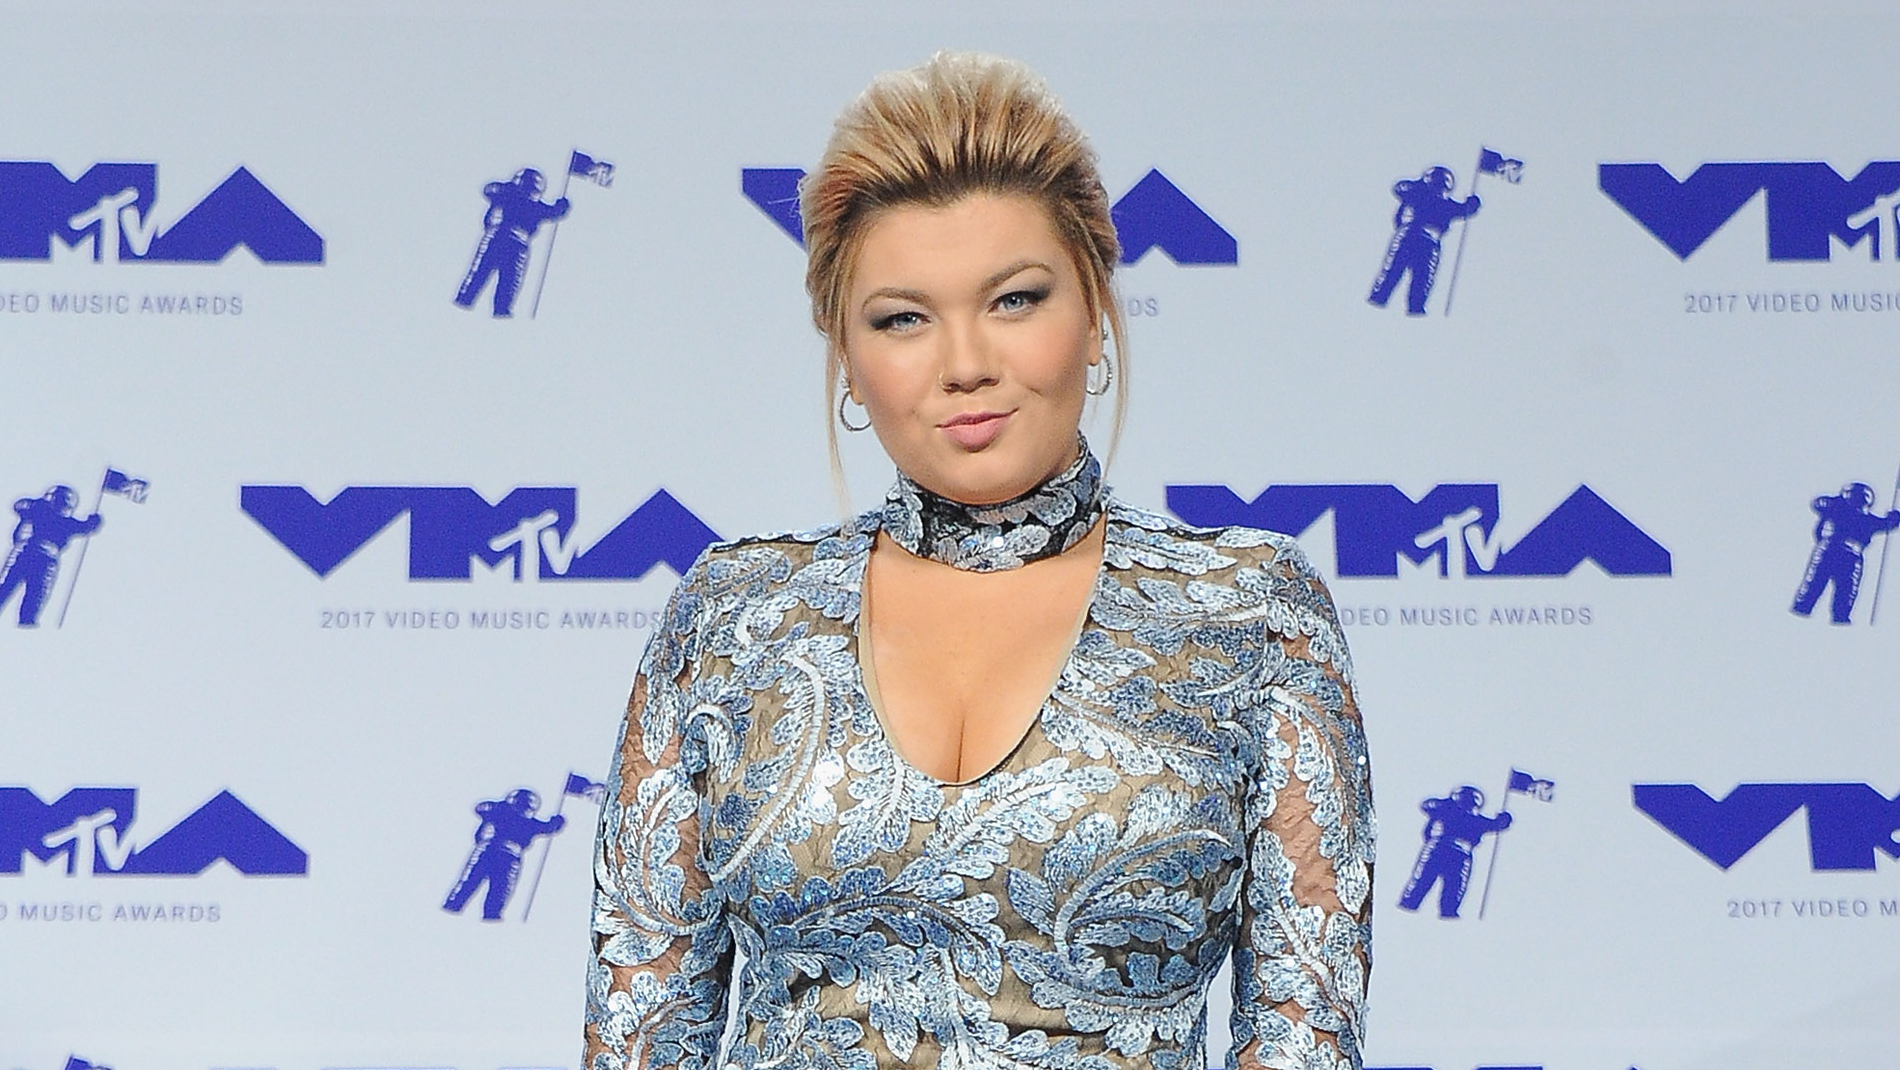 ‘Teen Mom’ Star Amber Portwood Moves To Block Ex Andrew Glennon From Moving With Their Baby